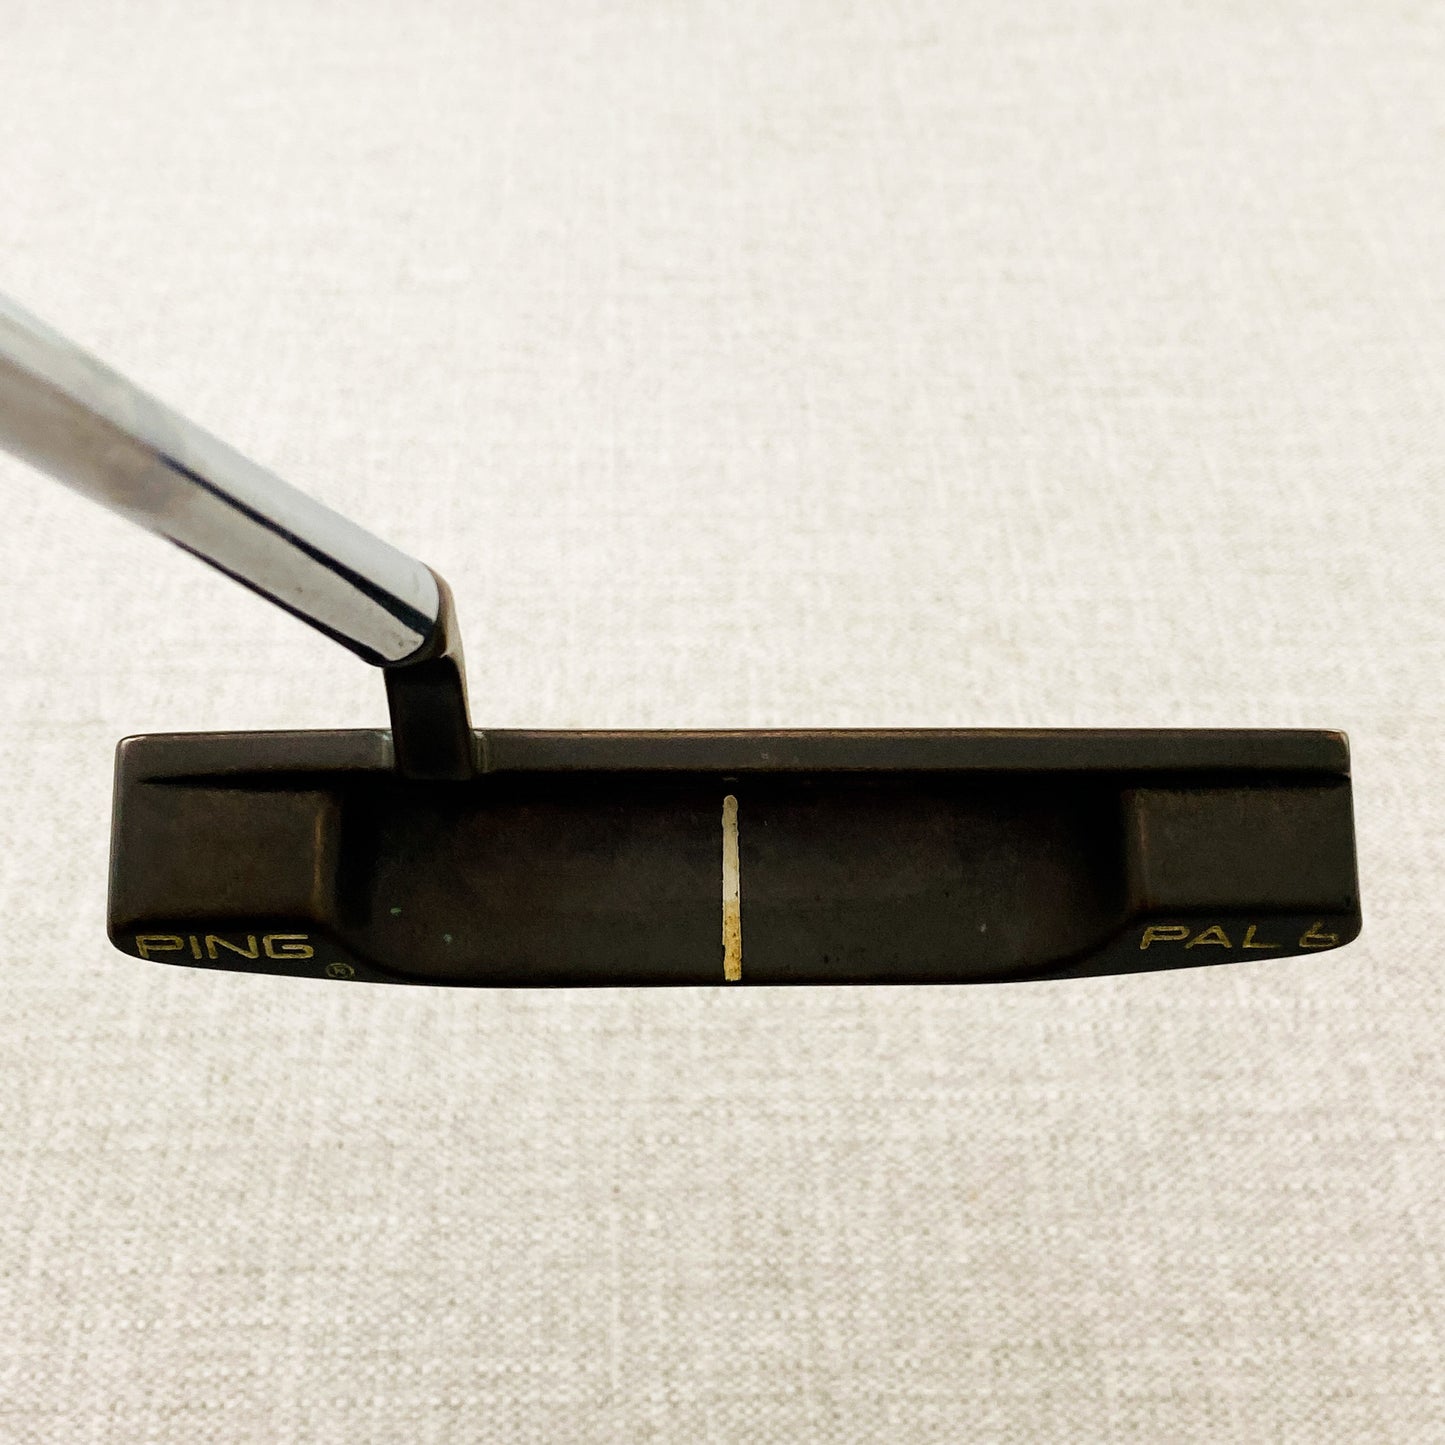 PING Pal 6 Beryllium Copper Putter. 35 inch - Very Good Condition # 11058